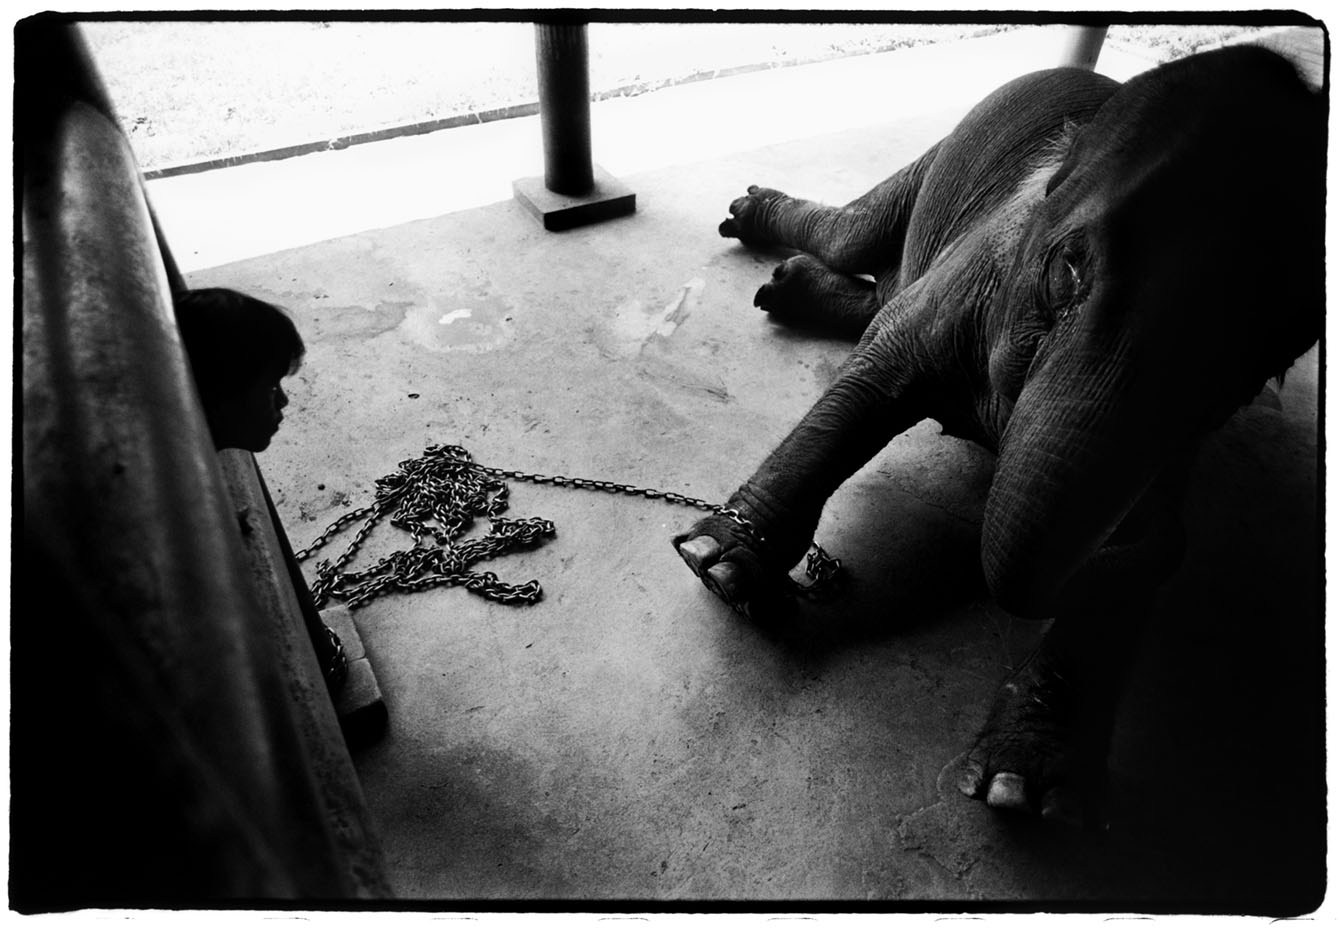 Thailand, Lampang Province A young mahout watches over a dying elephant at the Lampang Elephant Hospital. 2005